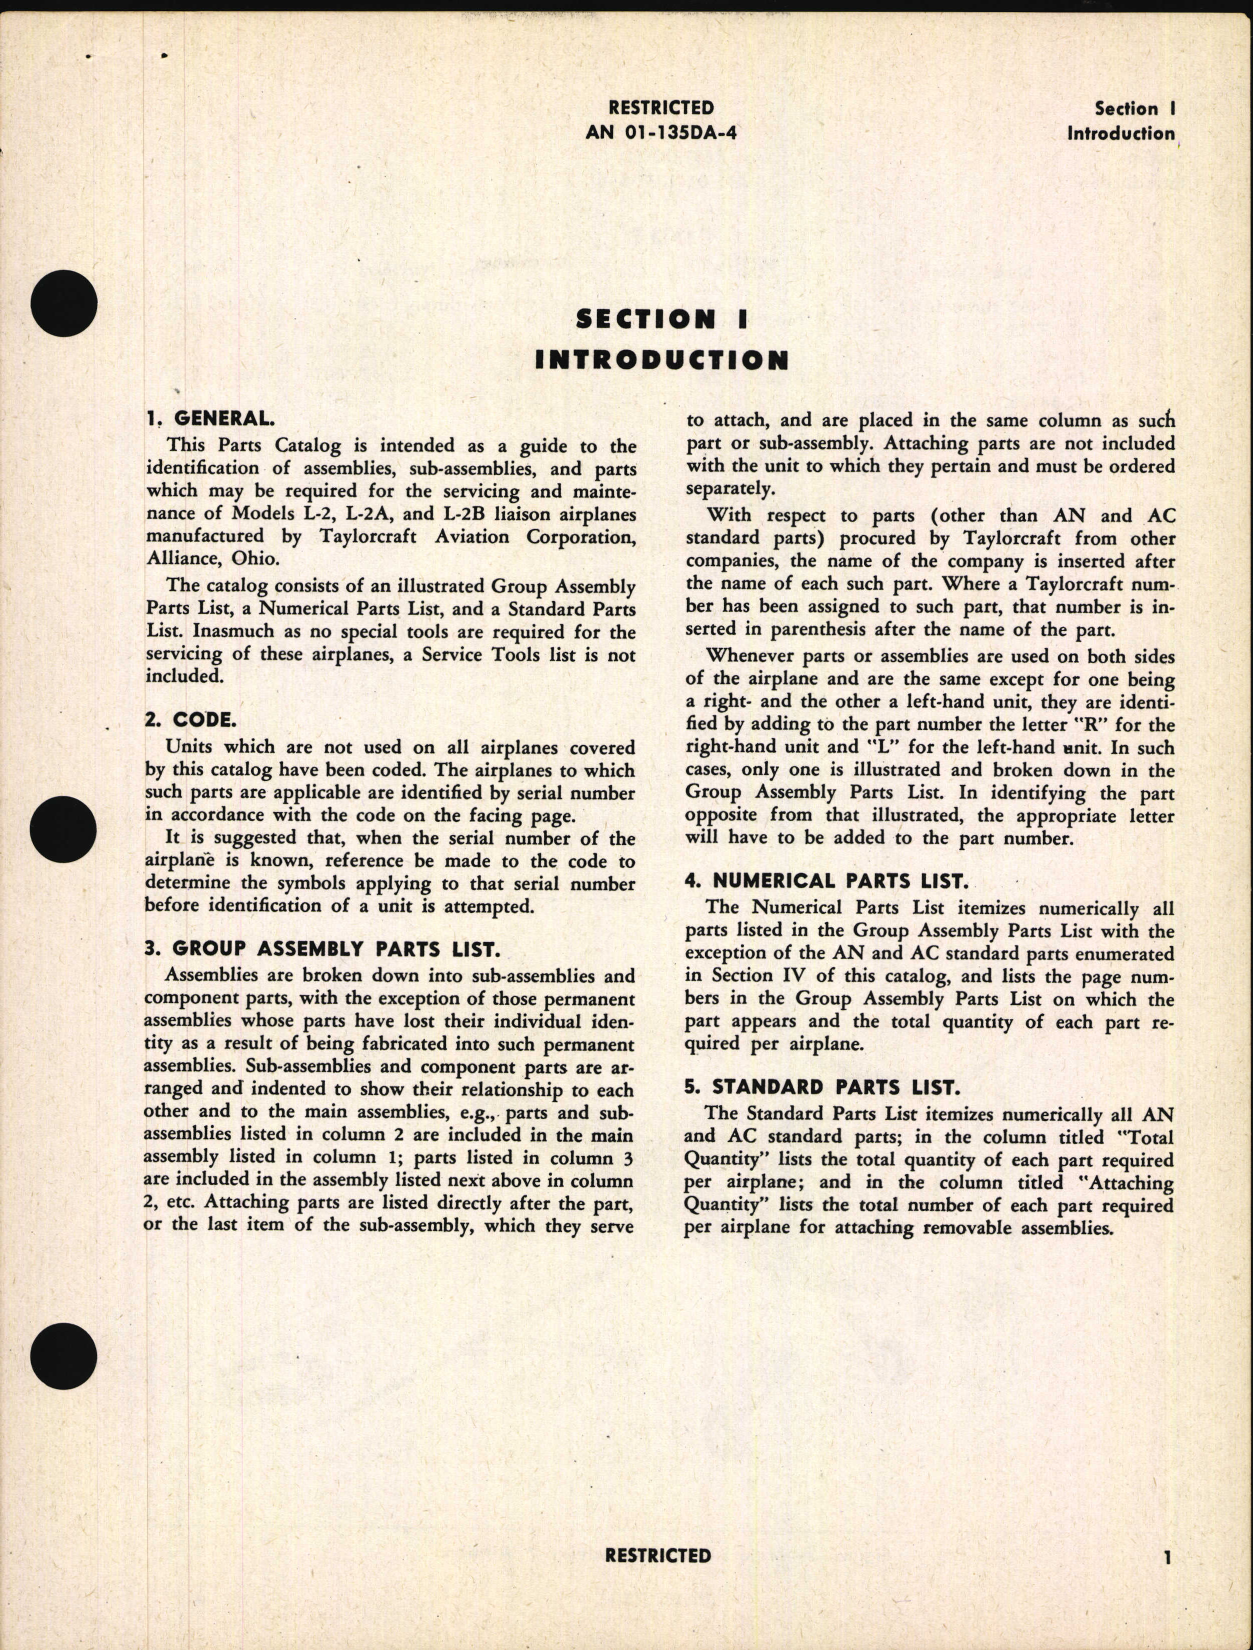 Sample page 5 from AirCorps Library document: Parts Catalog for Models L-2, L-2A, and L-2B